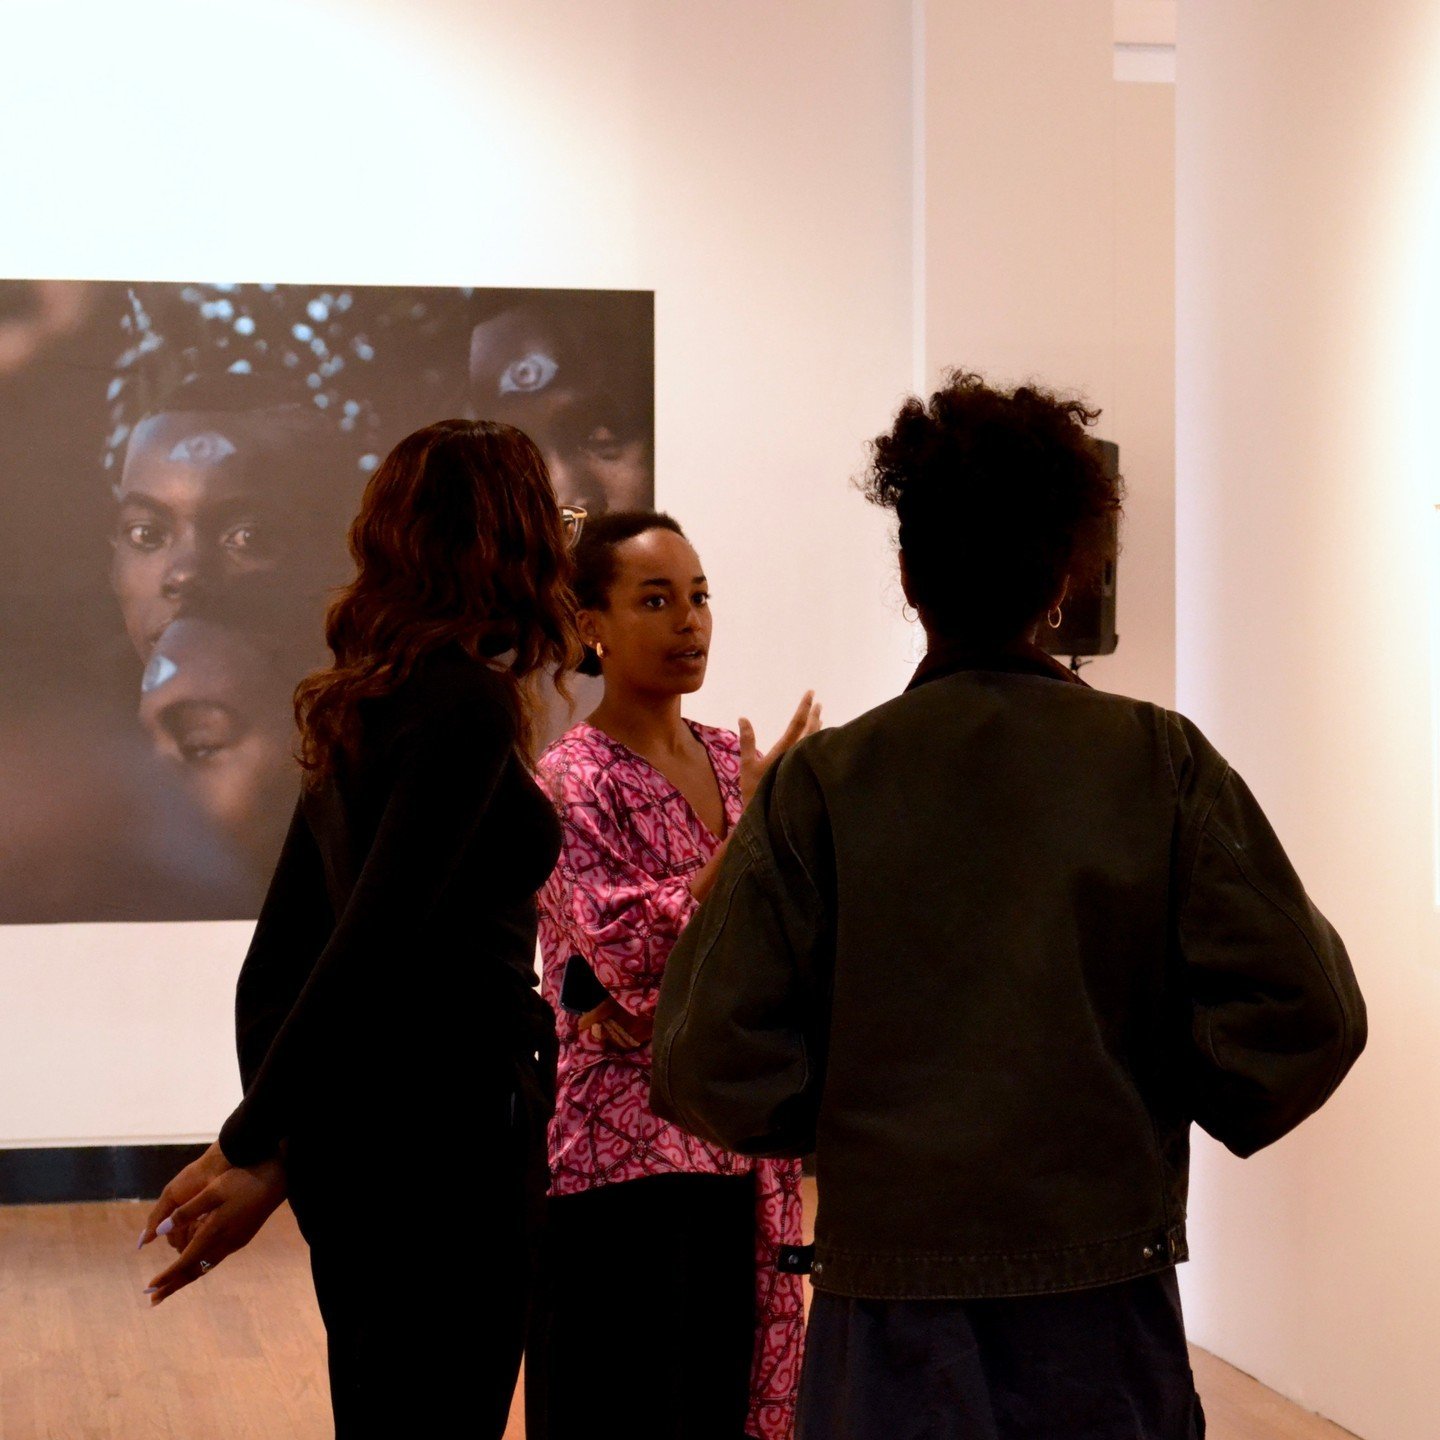 Join us on Saturday, May 18th for a curator-guided tour of Nuits Baln&eacute;aires' exhibition, United in Bassam, with Mariah Coulibaly!

During the tour, Mariah will lead participants in exploring the photographer&rsquo;s creative process, the genes